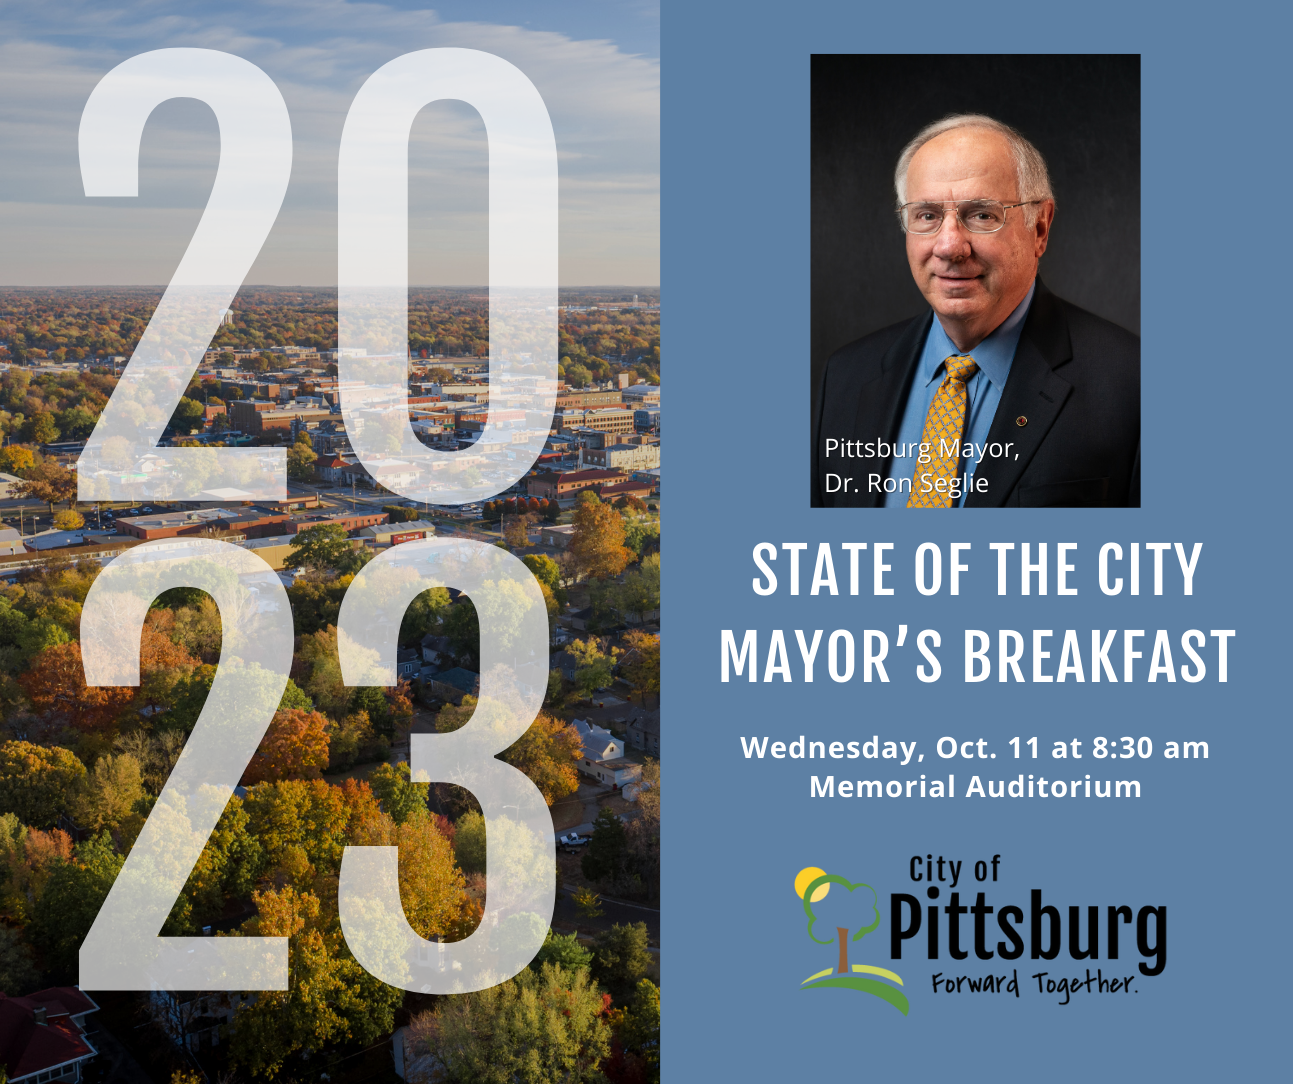 State of the City Mayor’s Breakfast